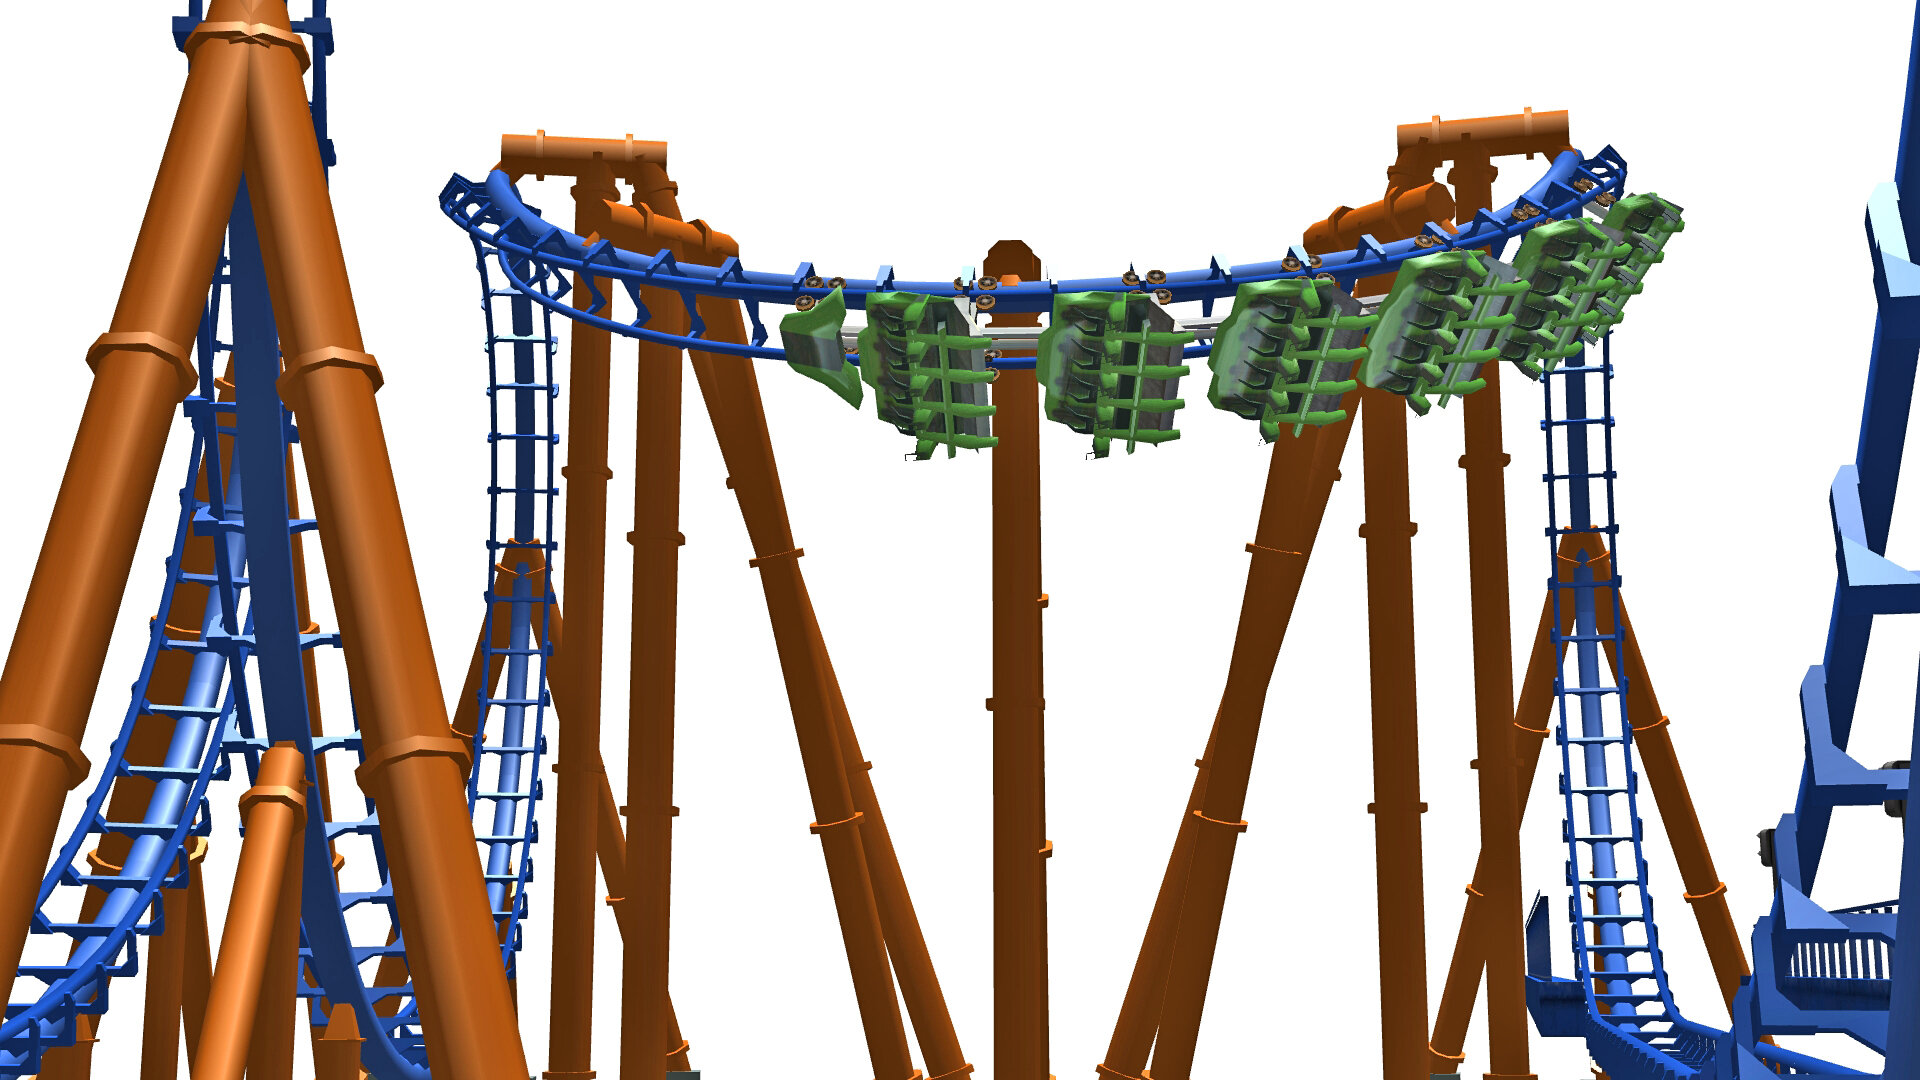 More information about "Francescoaster's Flying Boomerang CT"